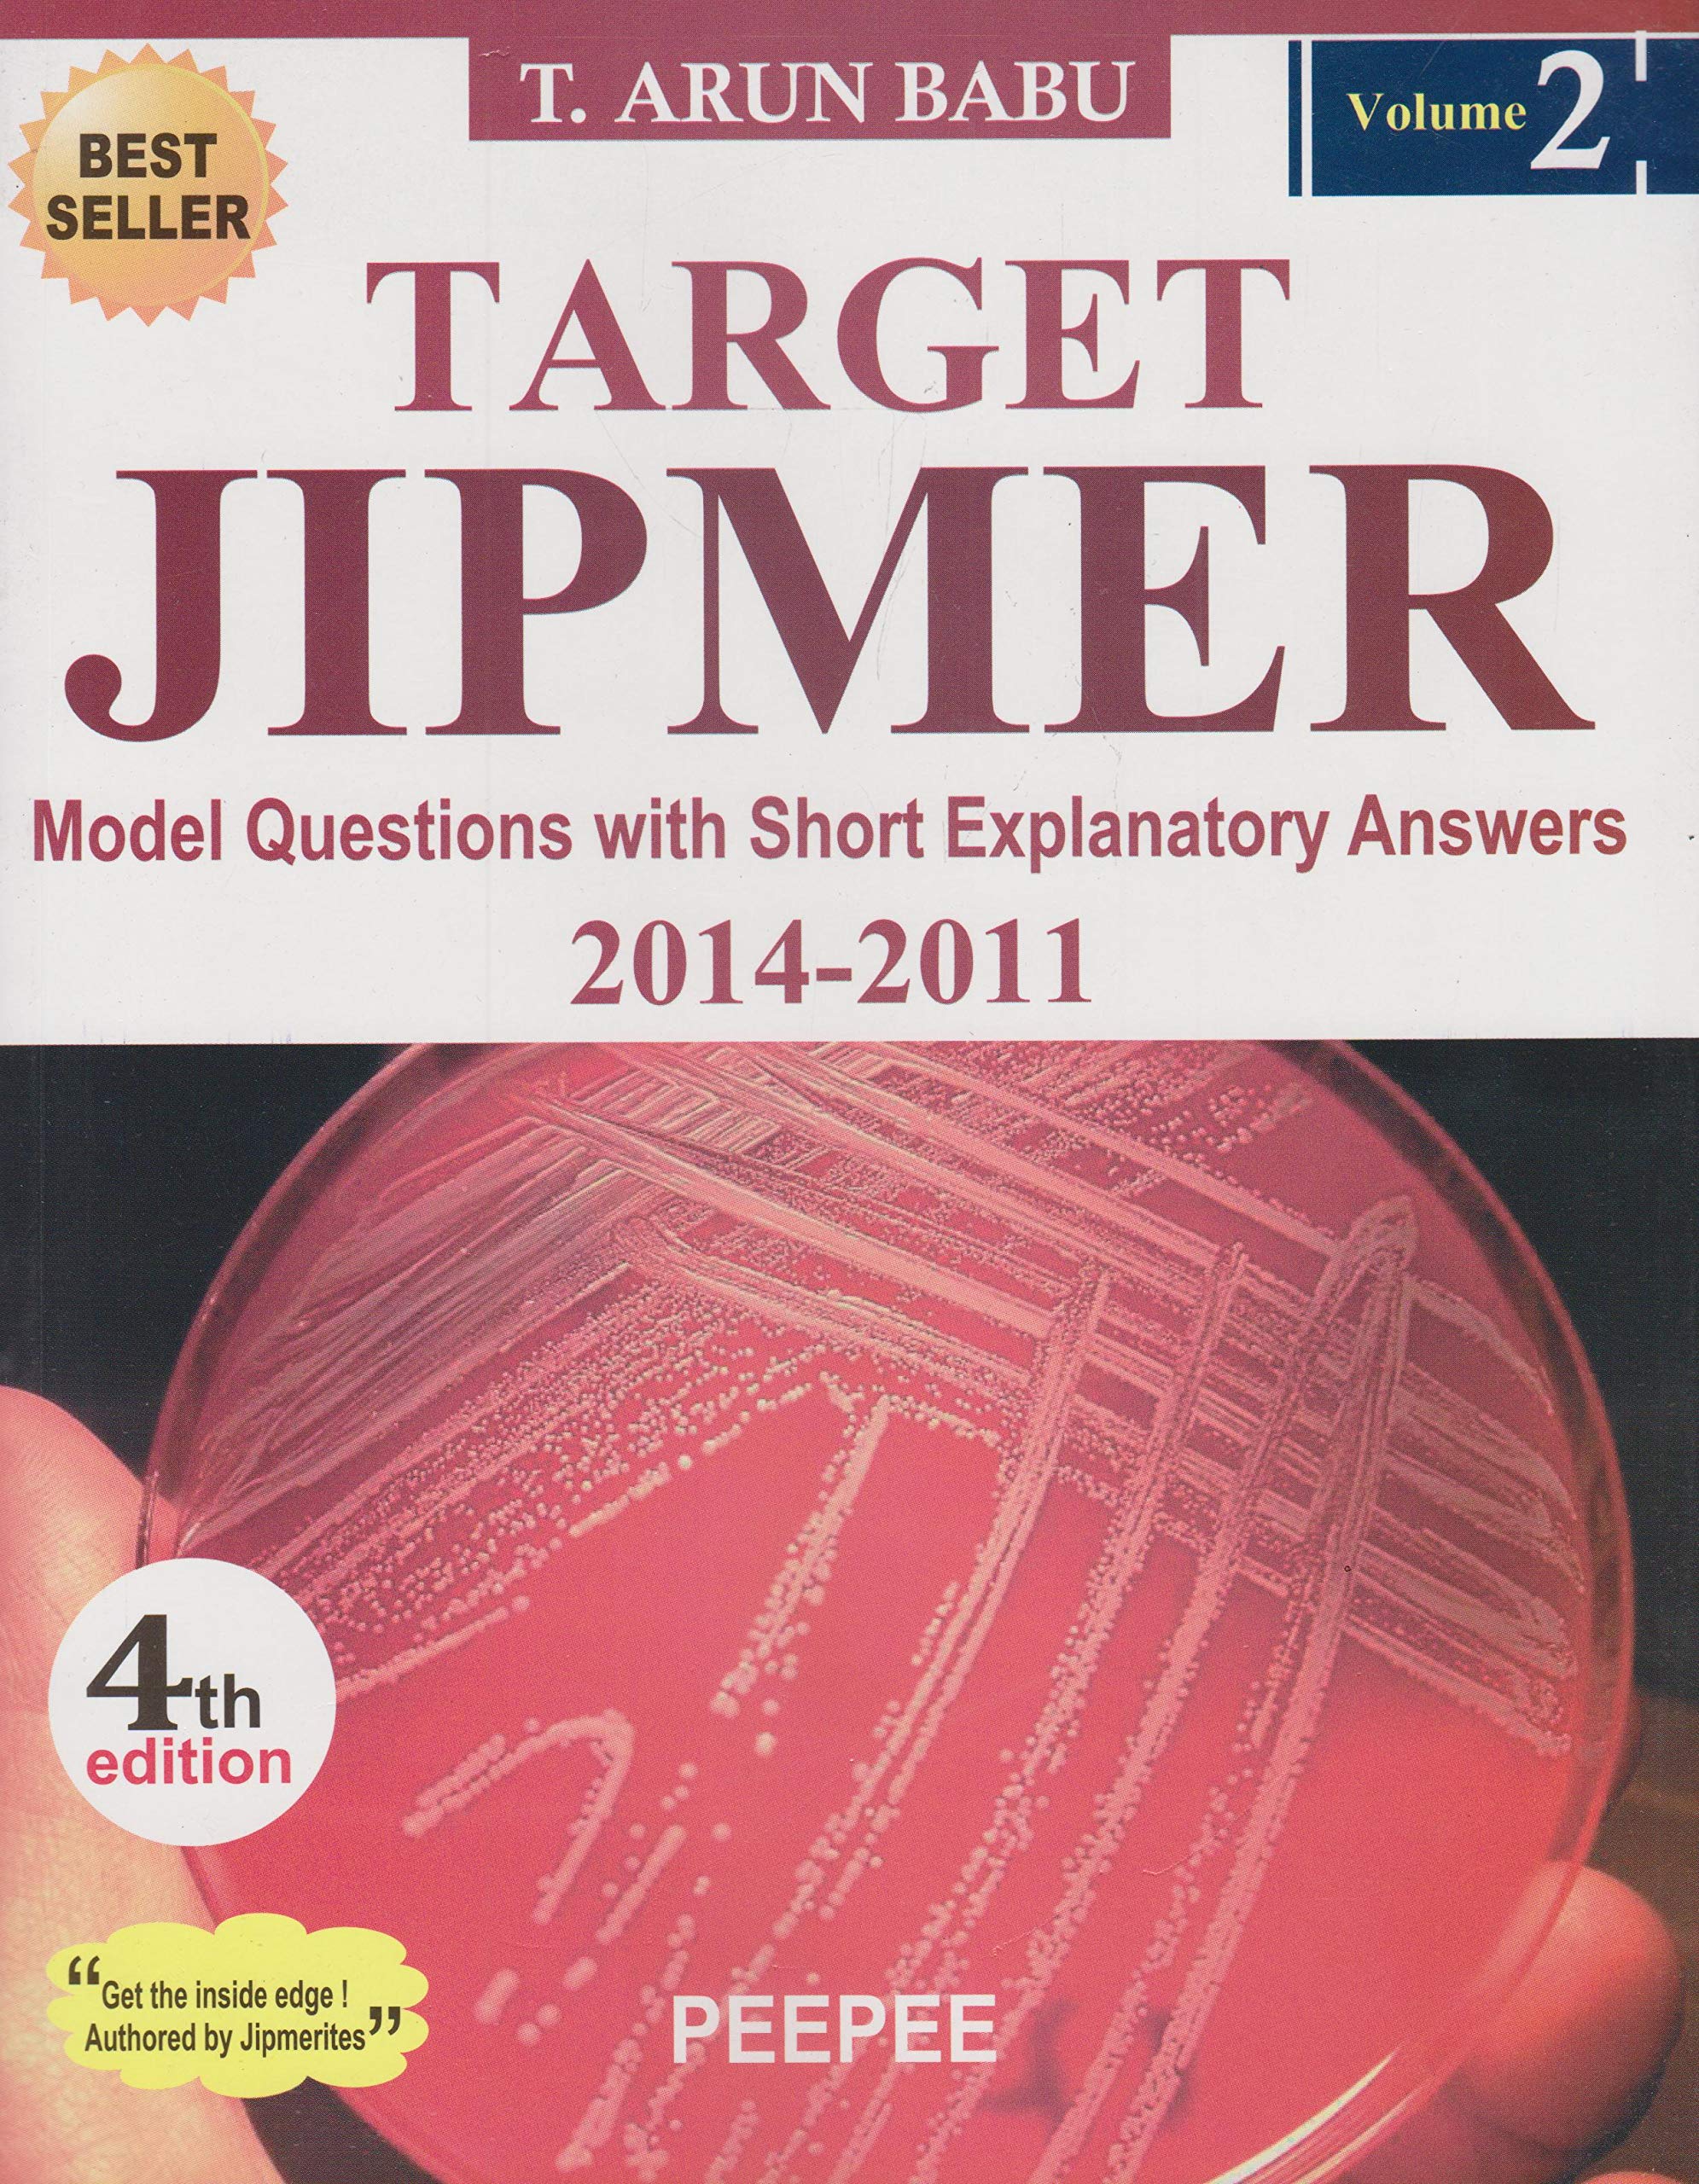 Target Jipmer Model Questions With Short Explanatory Answers